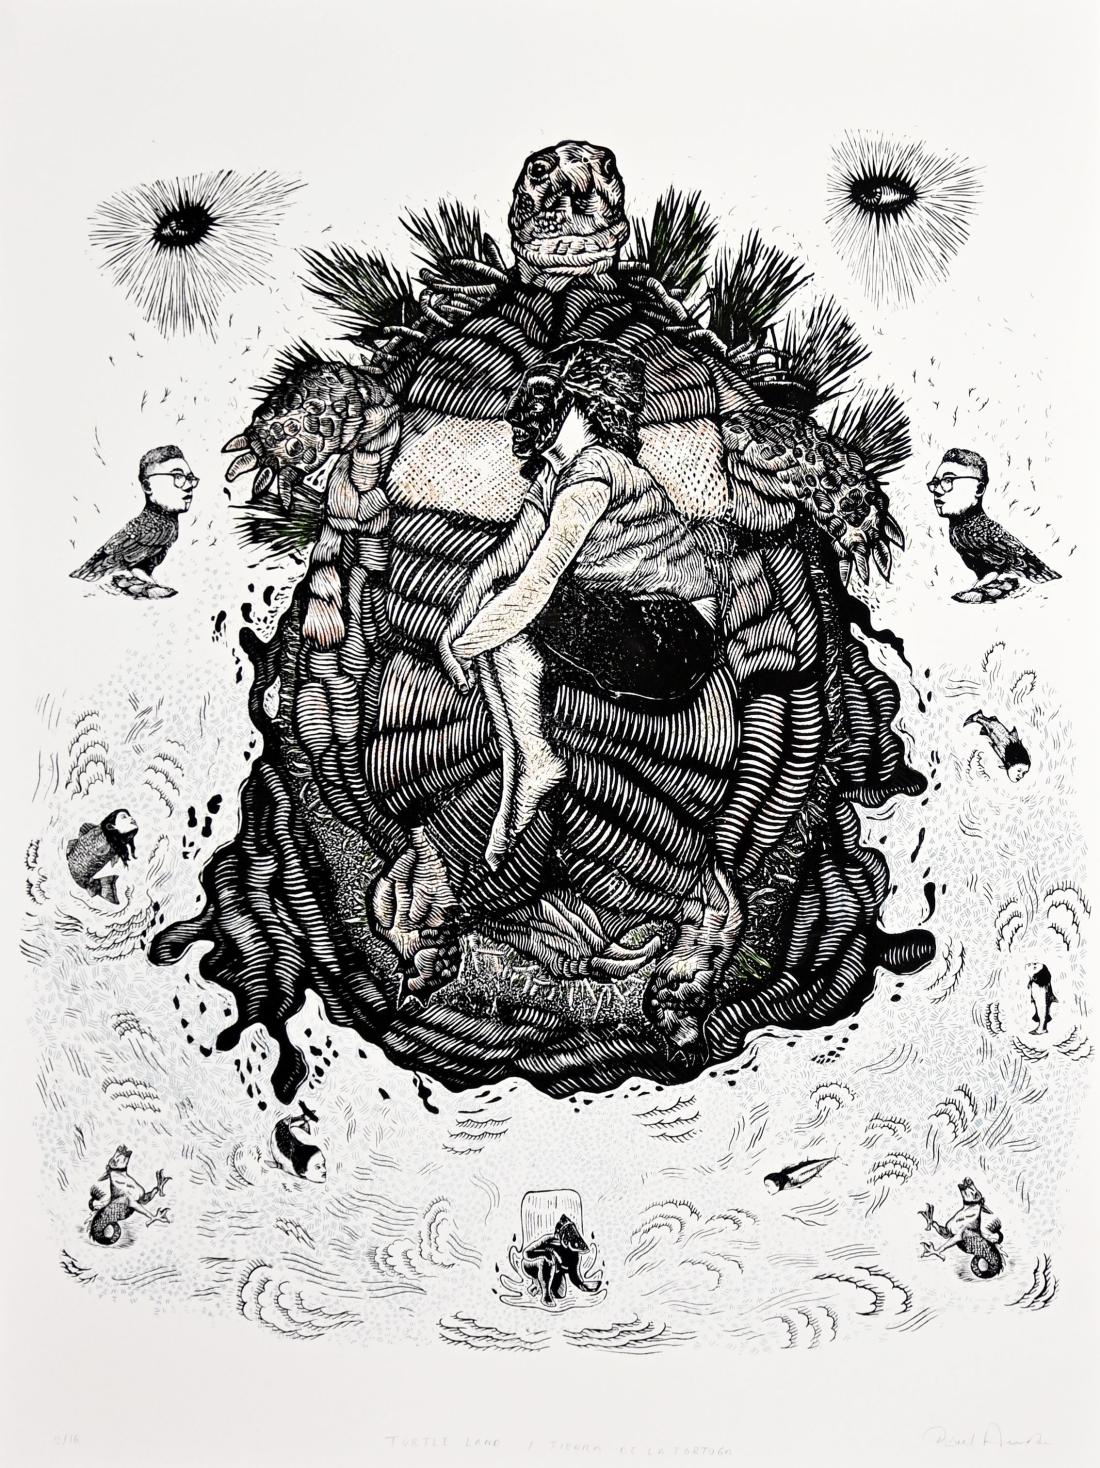 "Turtle Land" by Pável Acevedo, 2021, woodblock and screen print, 40"x30"